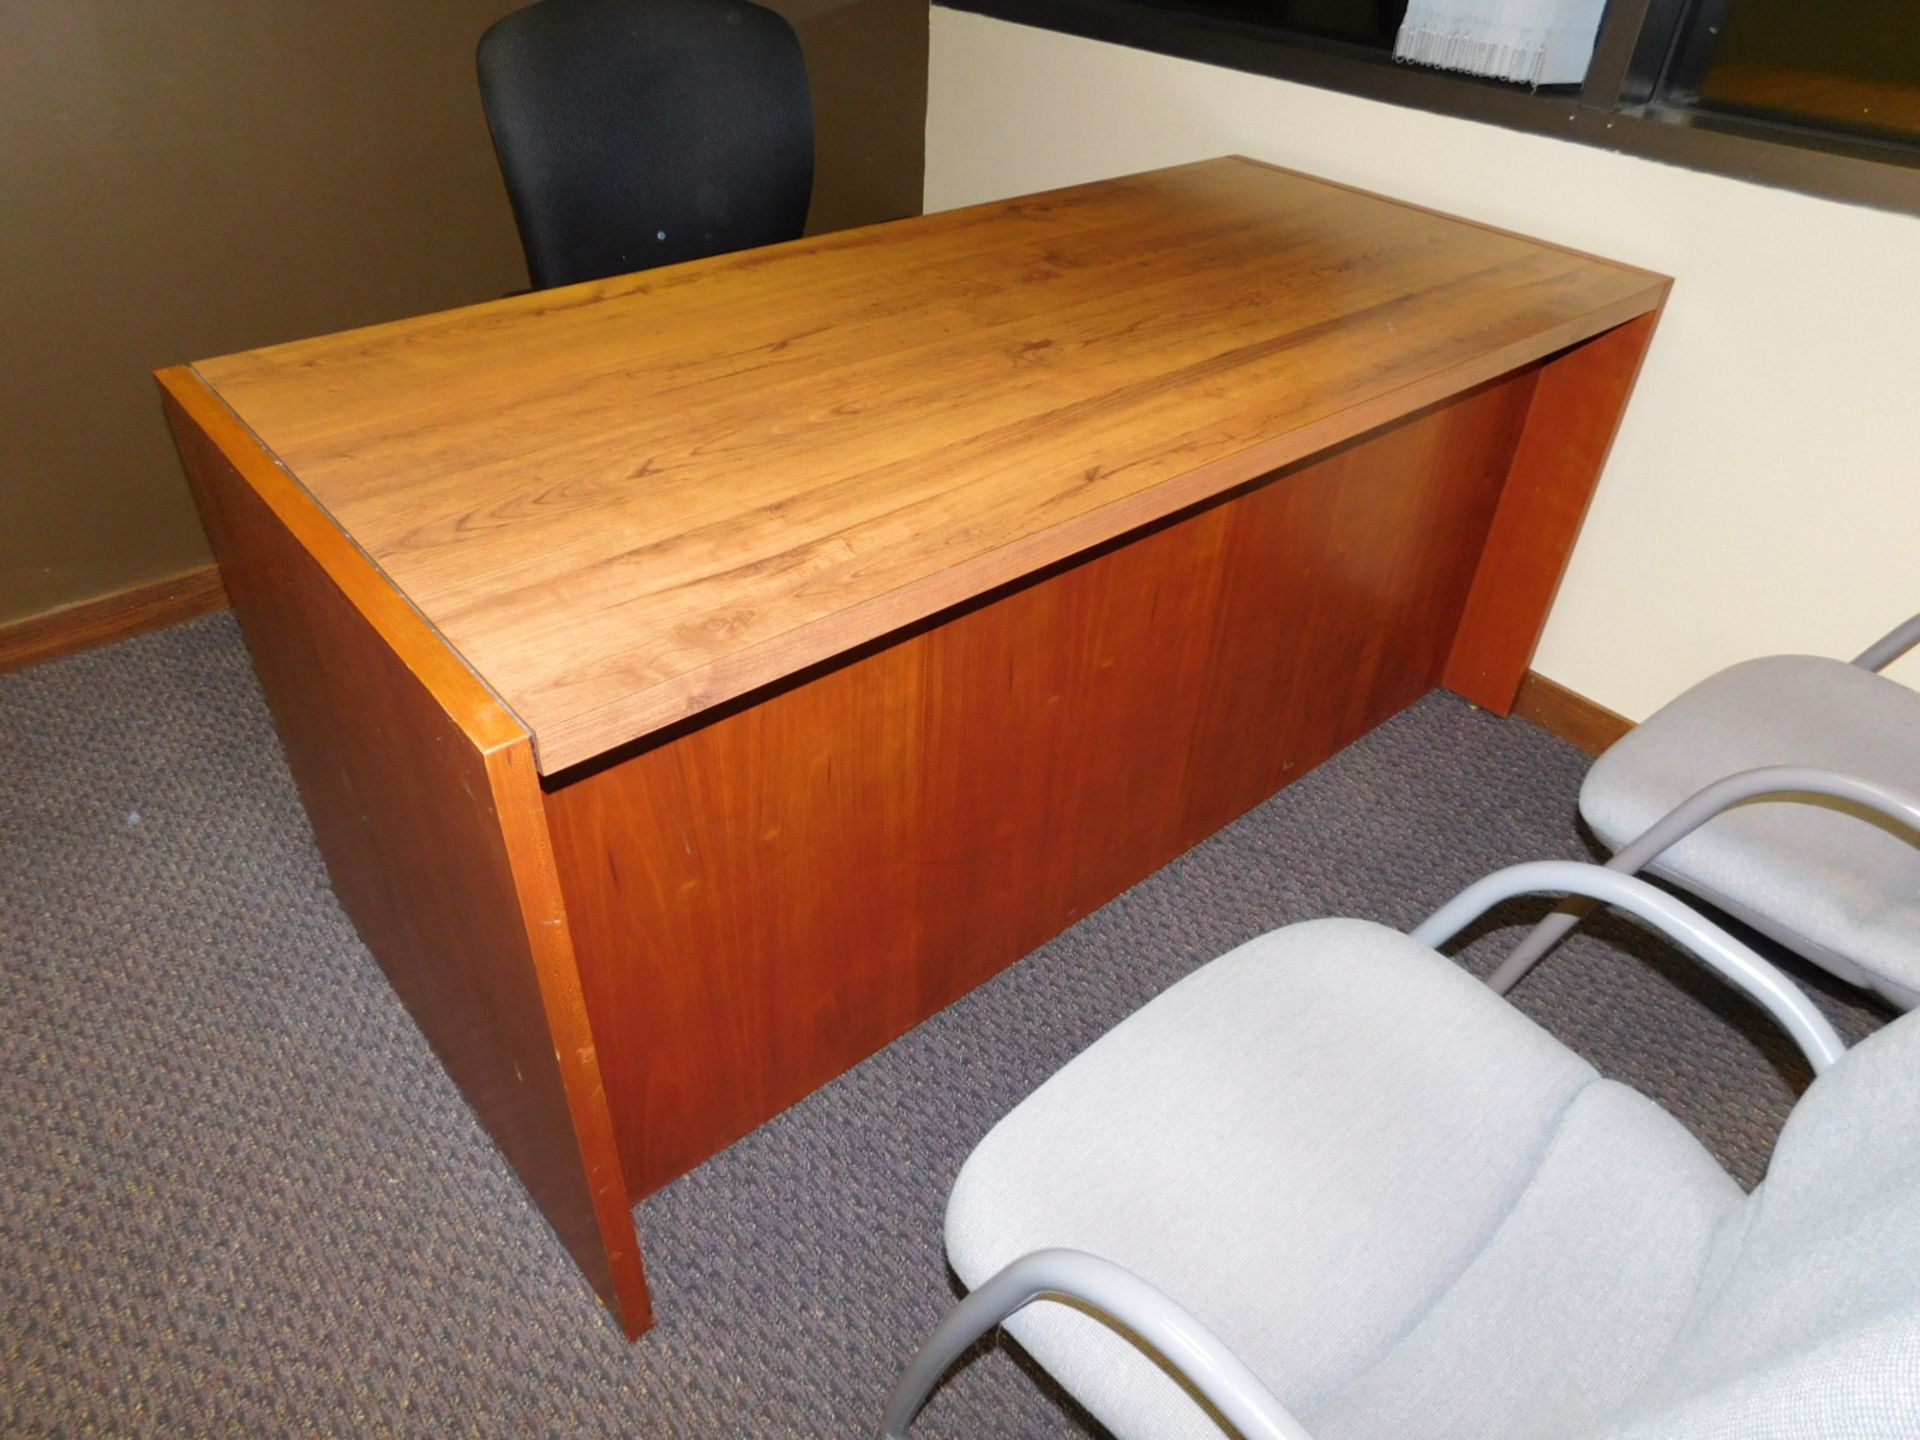 OSI 36" X 72" CHERRY WOOD DOUBLE PEDESTAL EXECUTIVE DESK - VERY HEAVY - SOLID DESK - OVER $3,100